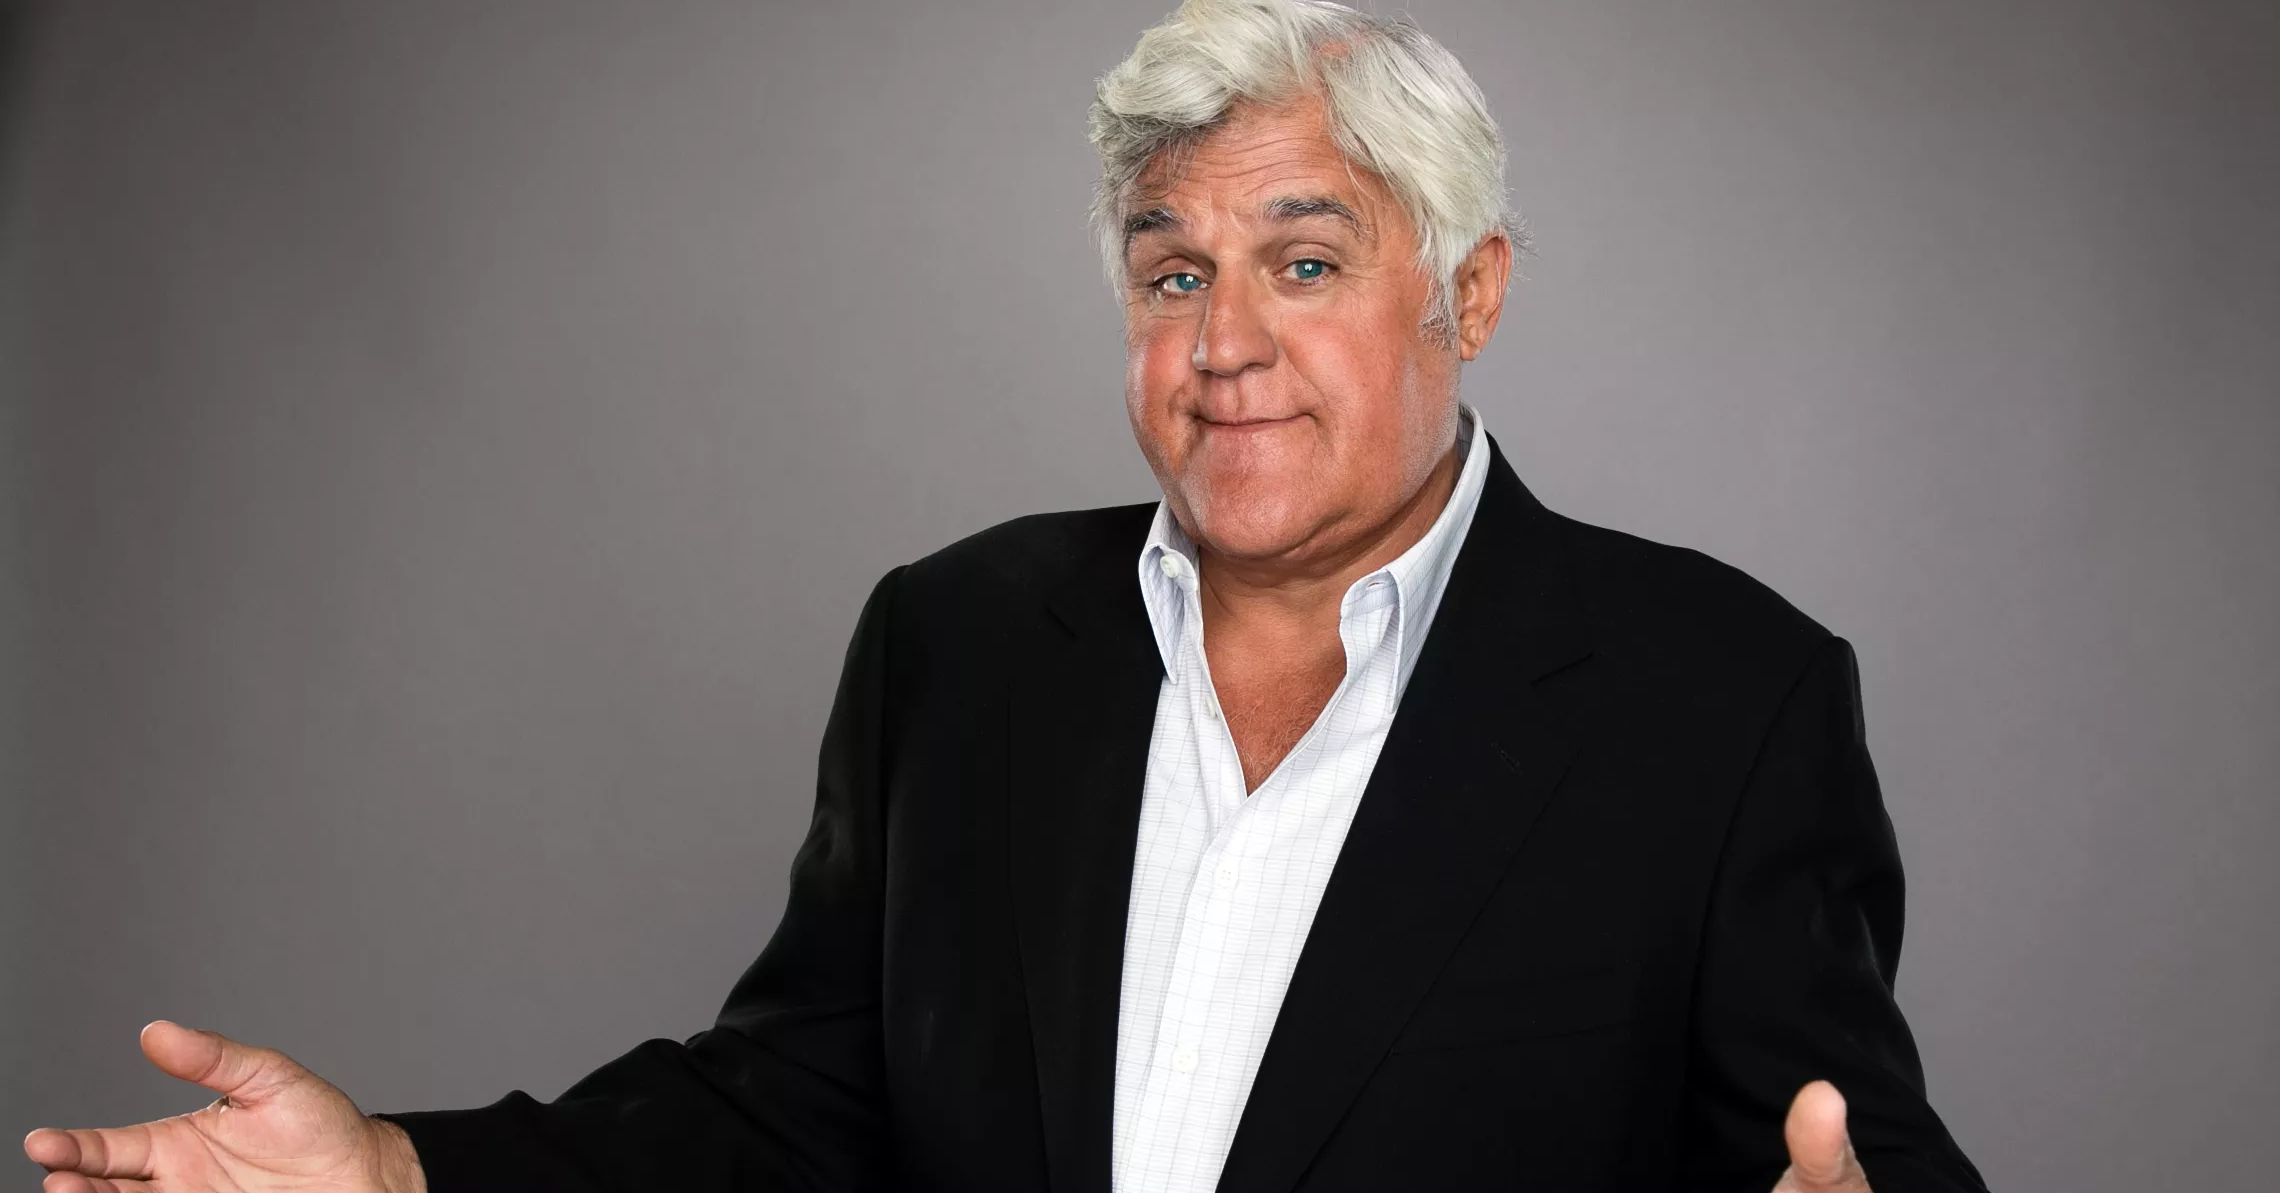 'America's Got Talent' Finds Itself in Even Hotter Water After Jay Leno's Racist Joke2280 x 1193